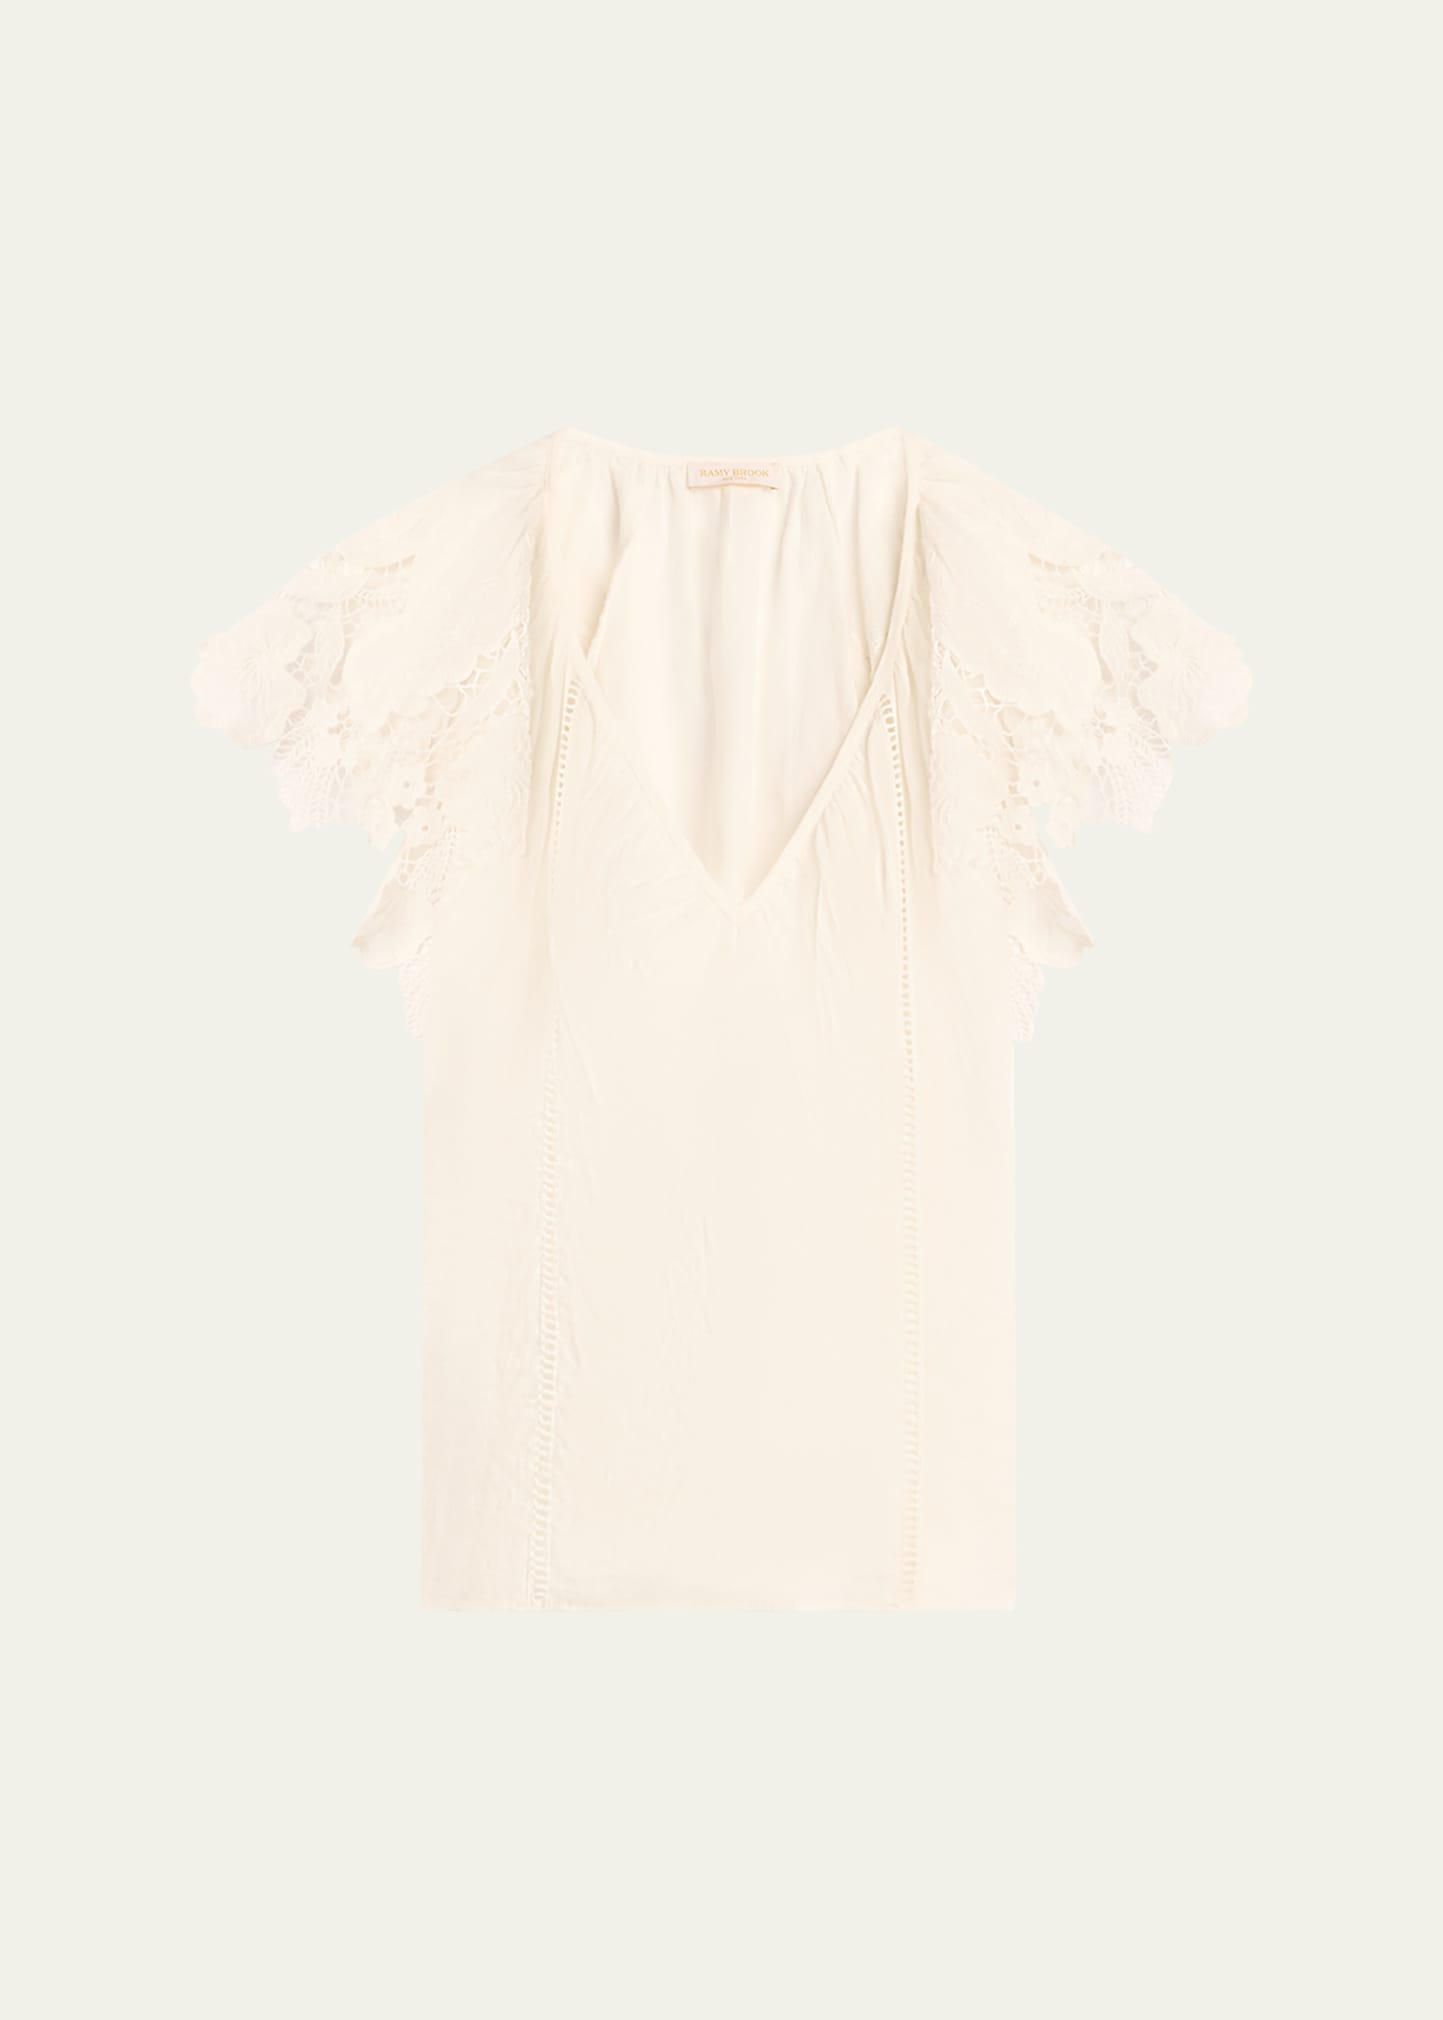 Hillary Embroidered Flutter-Sleeve Blouse